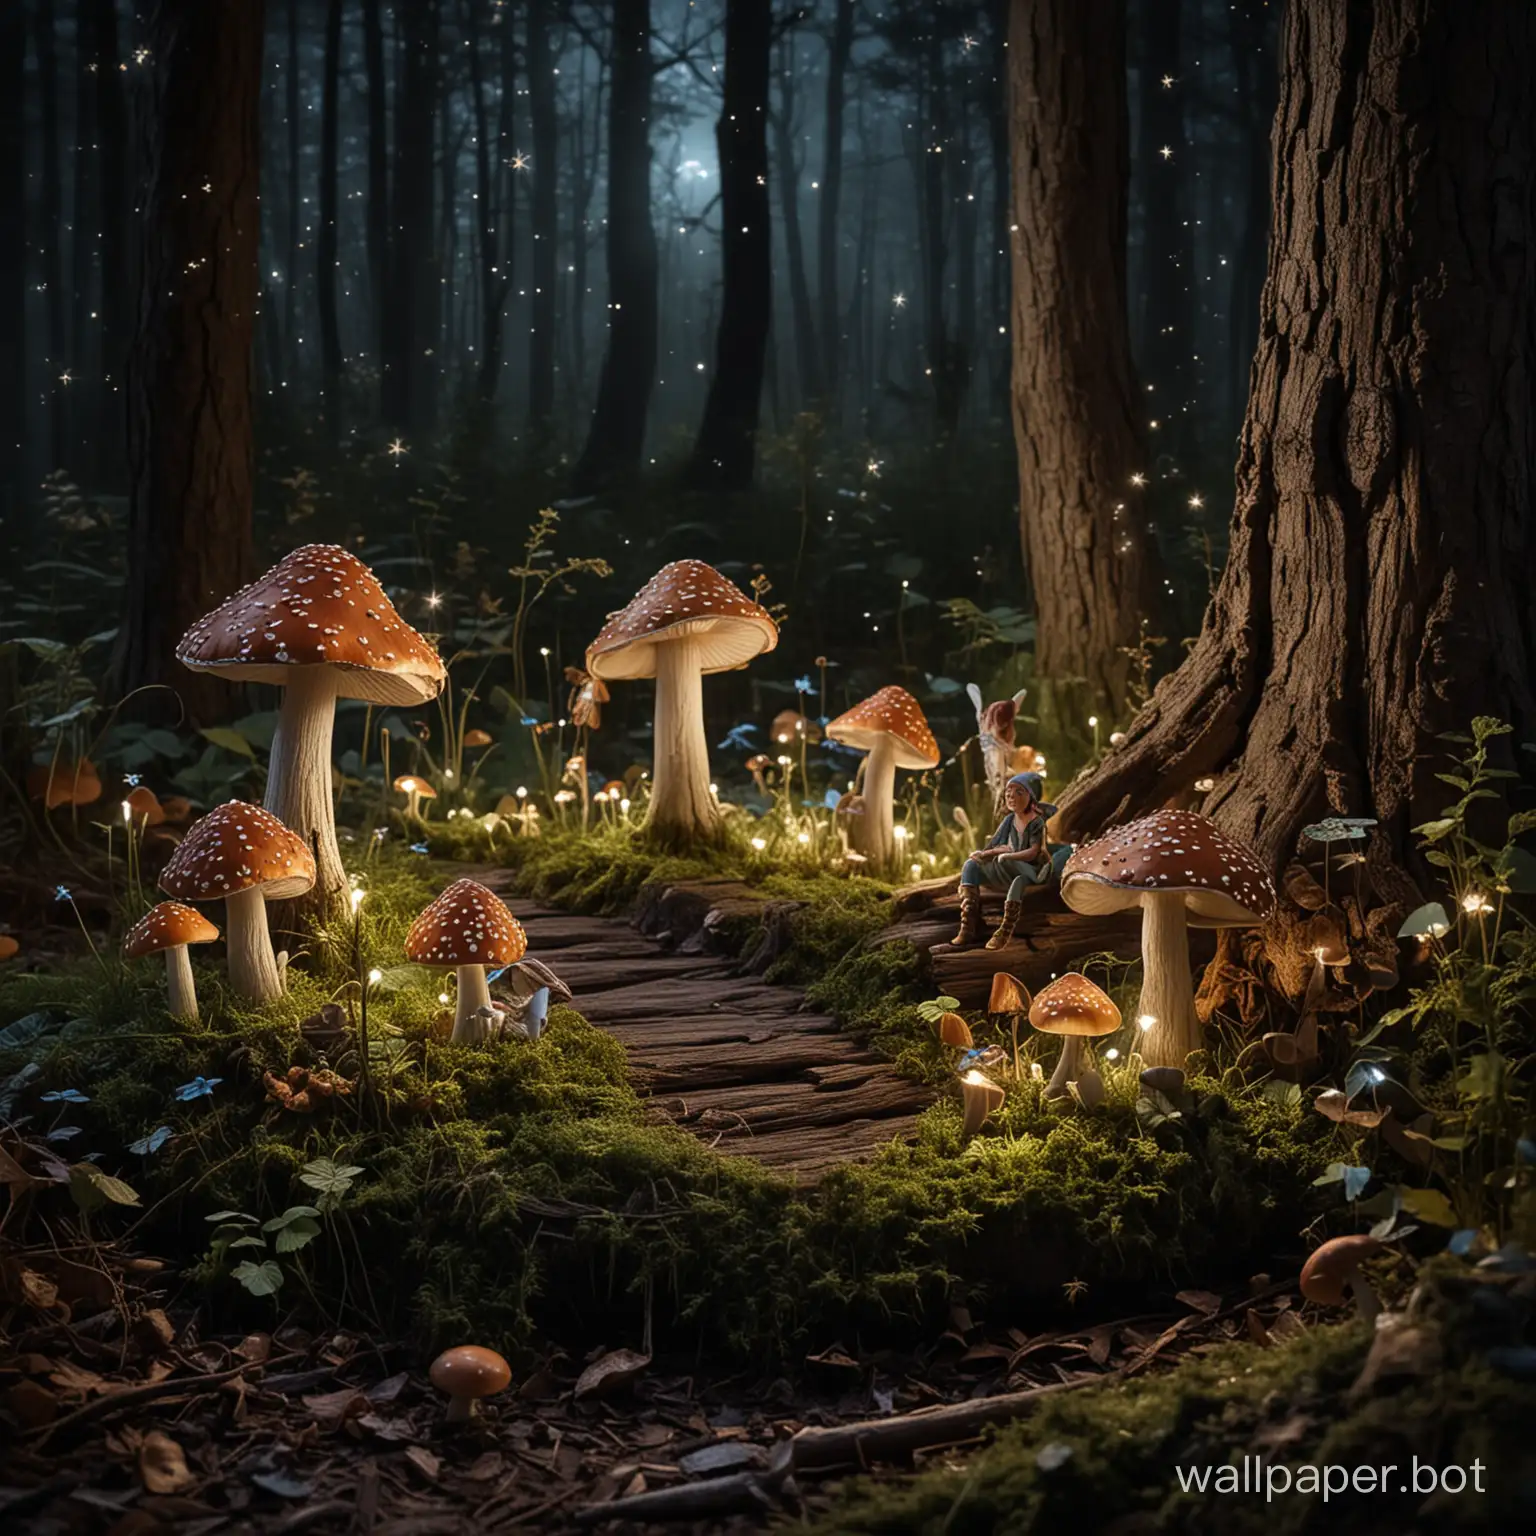 Enchanting-Fairy-Wood-at-Night-with-Elves-and-Mushrooms